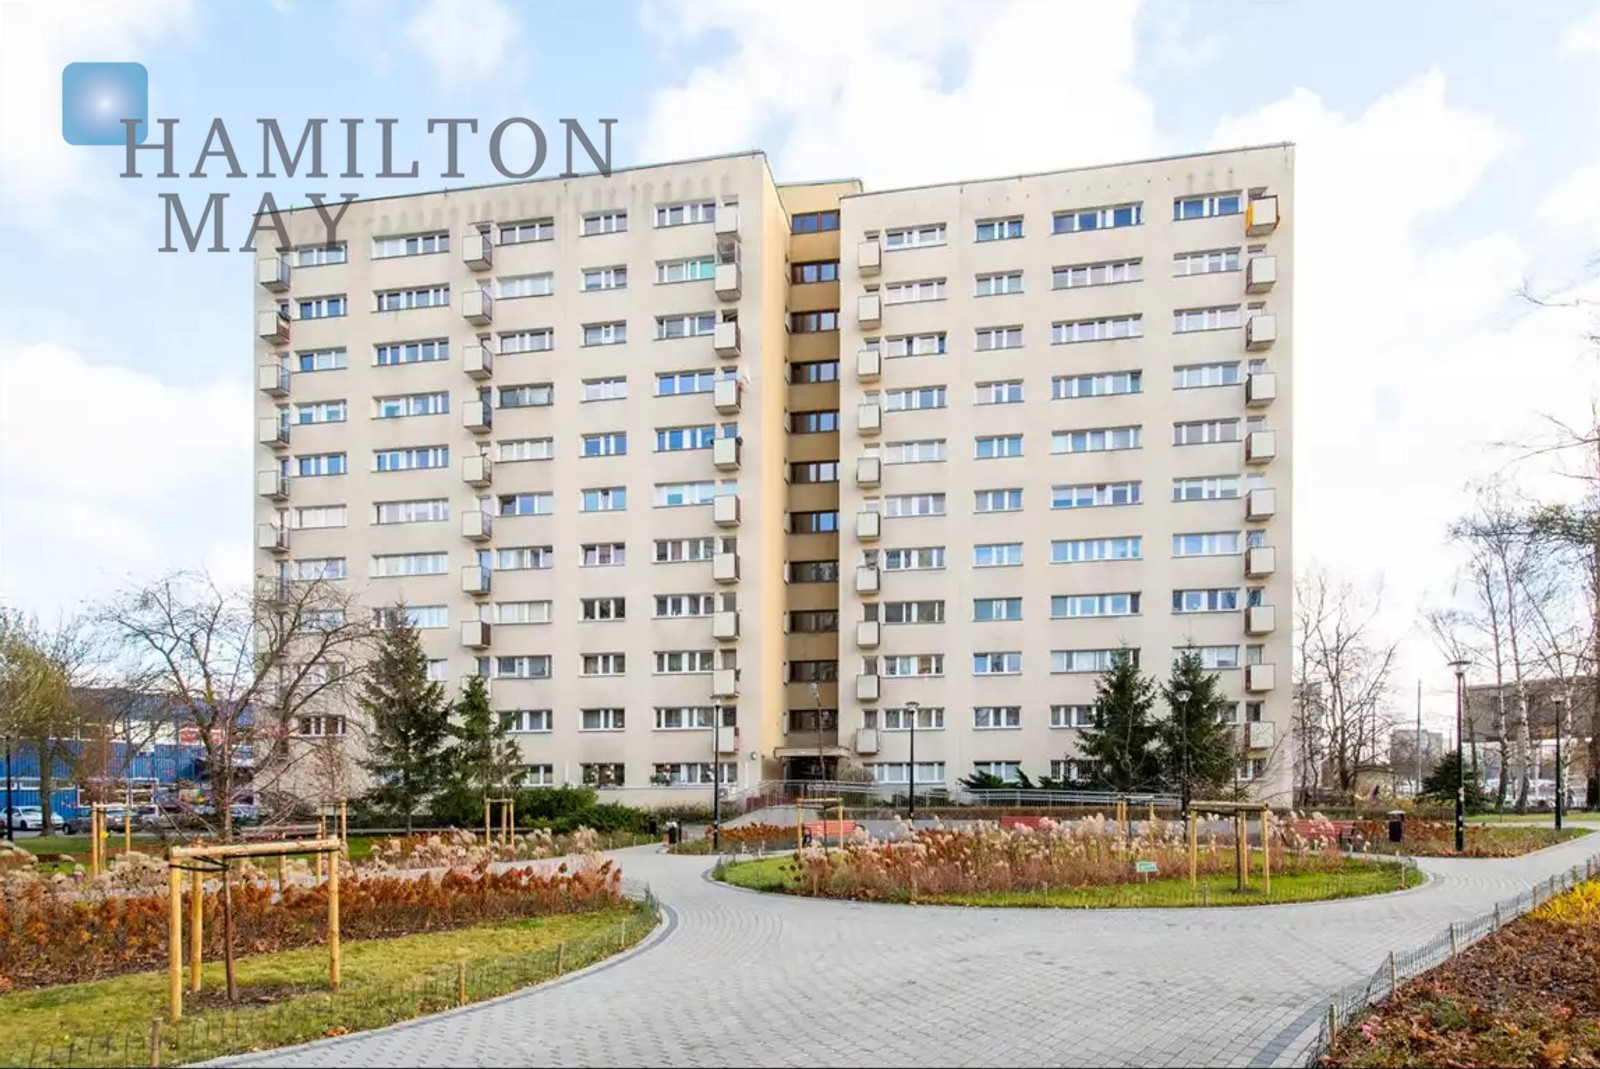 A nice, three-room apartment in Bielany Warsaw for sale